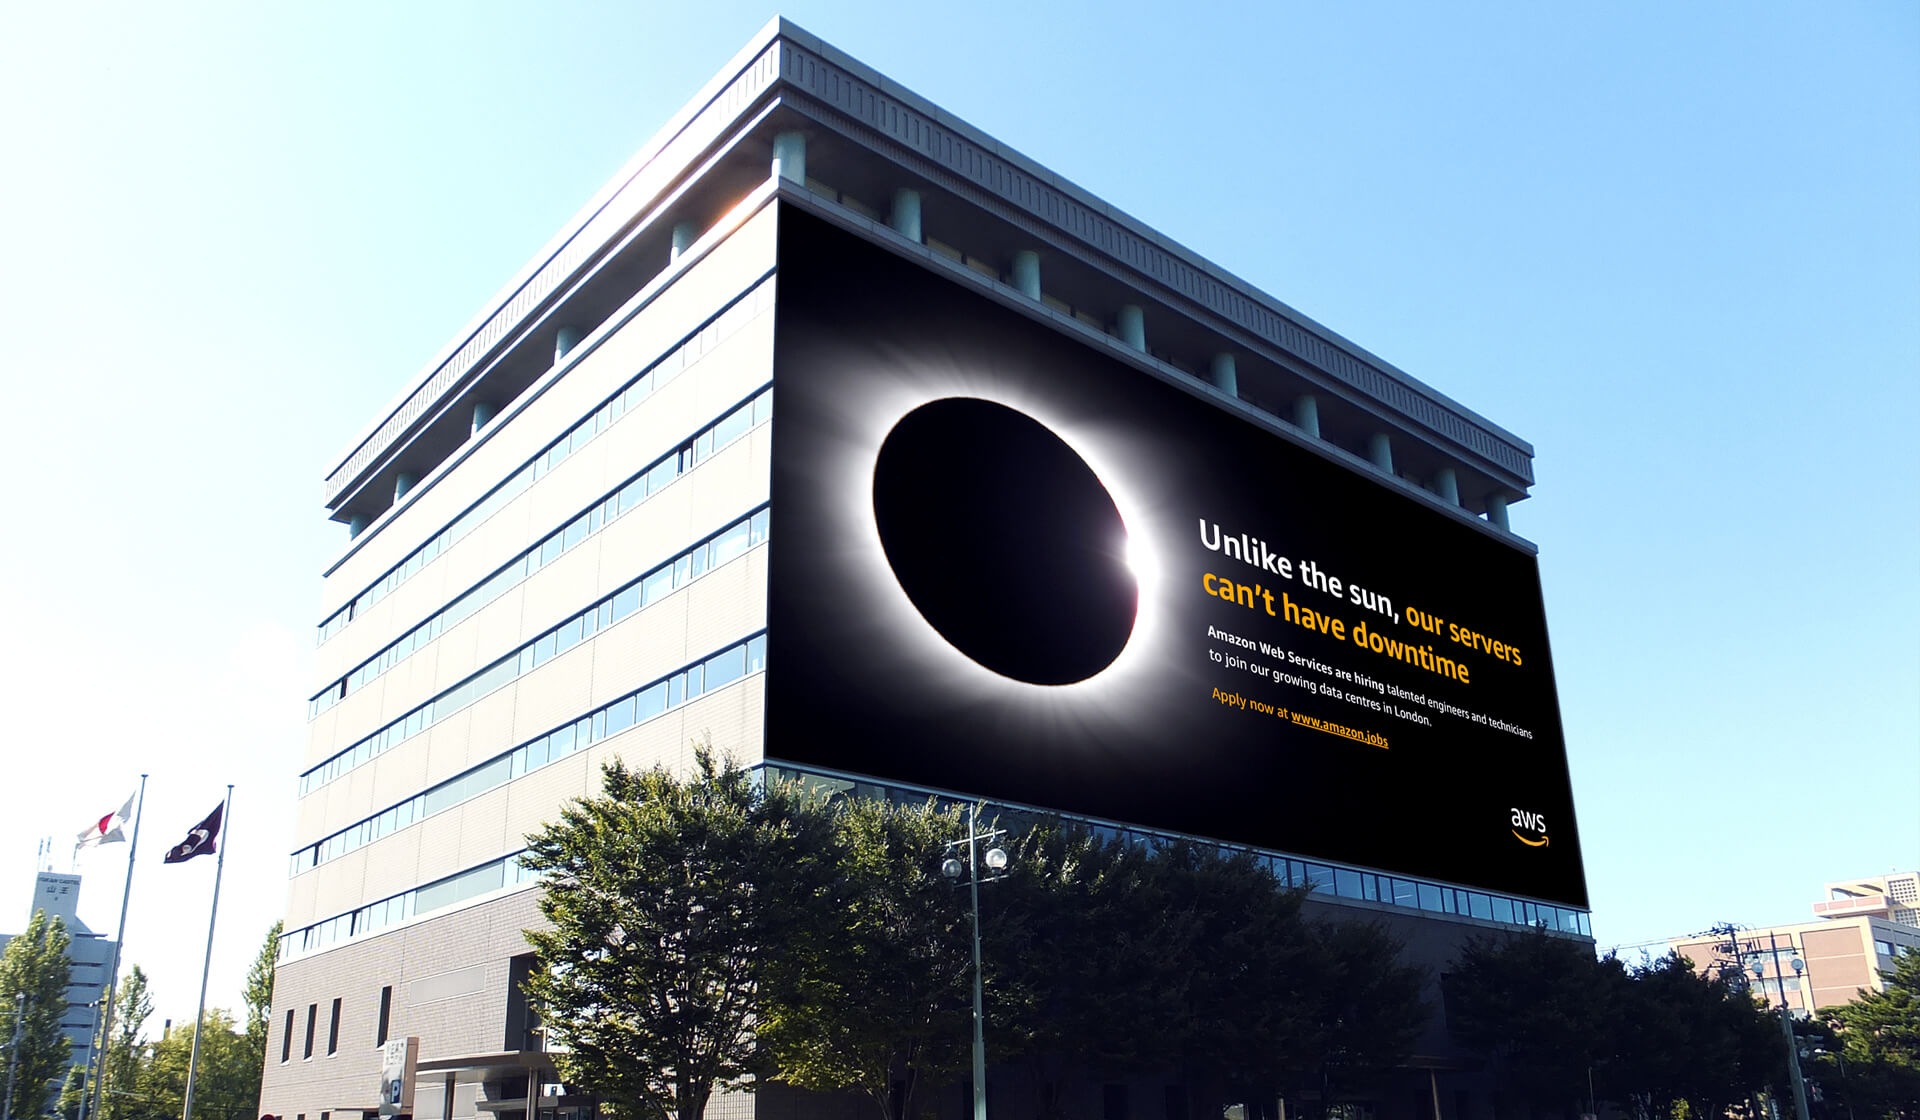 Amazon - Unlike The Sun - Mellor&Smith Advertising campaign on side of building